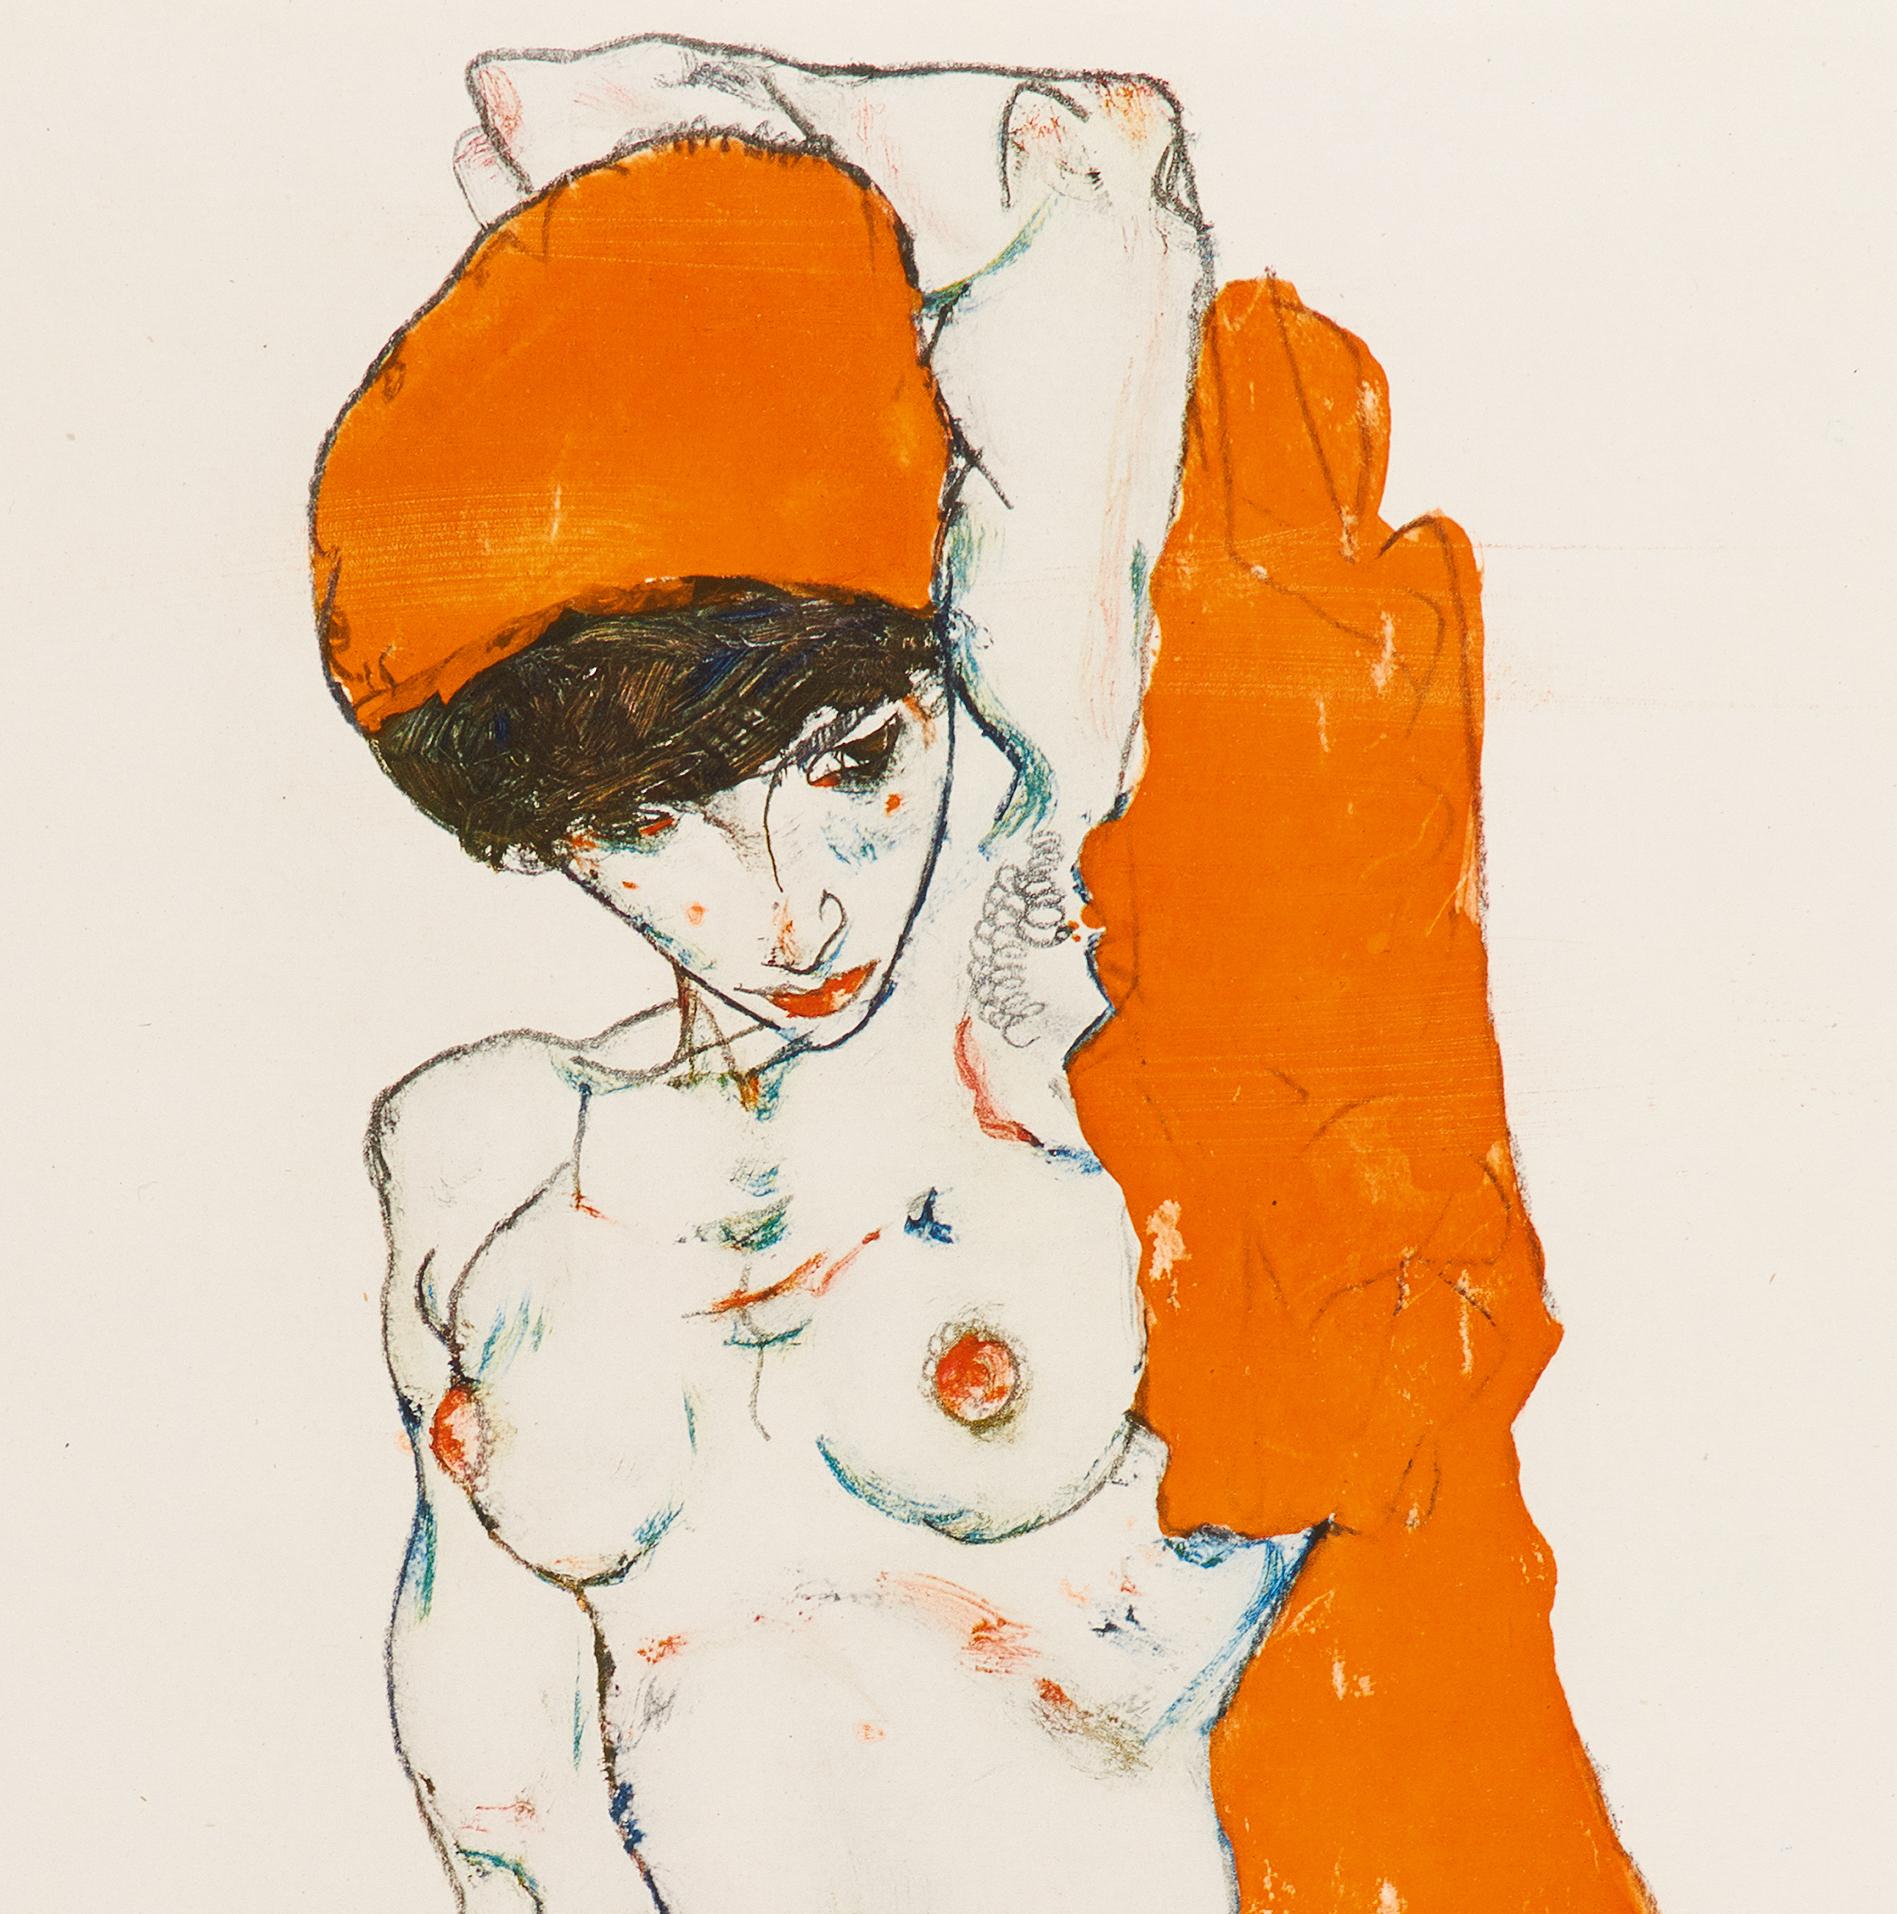 Sitting Female Nude - Original Collotype Print After Egon Schiele - 1920 - Gray Nude Print by (after) Egon Schiele